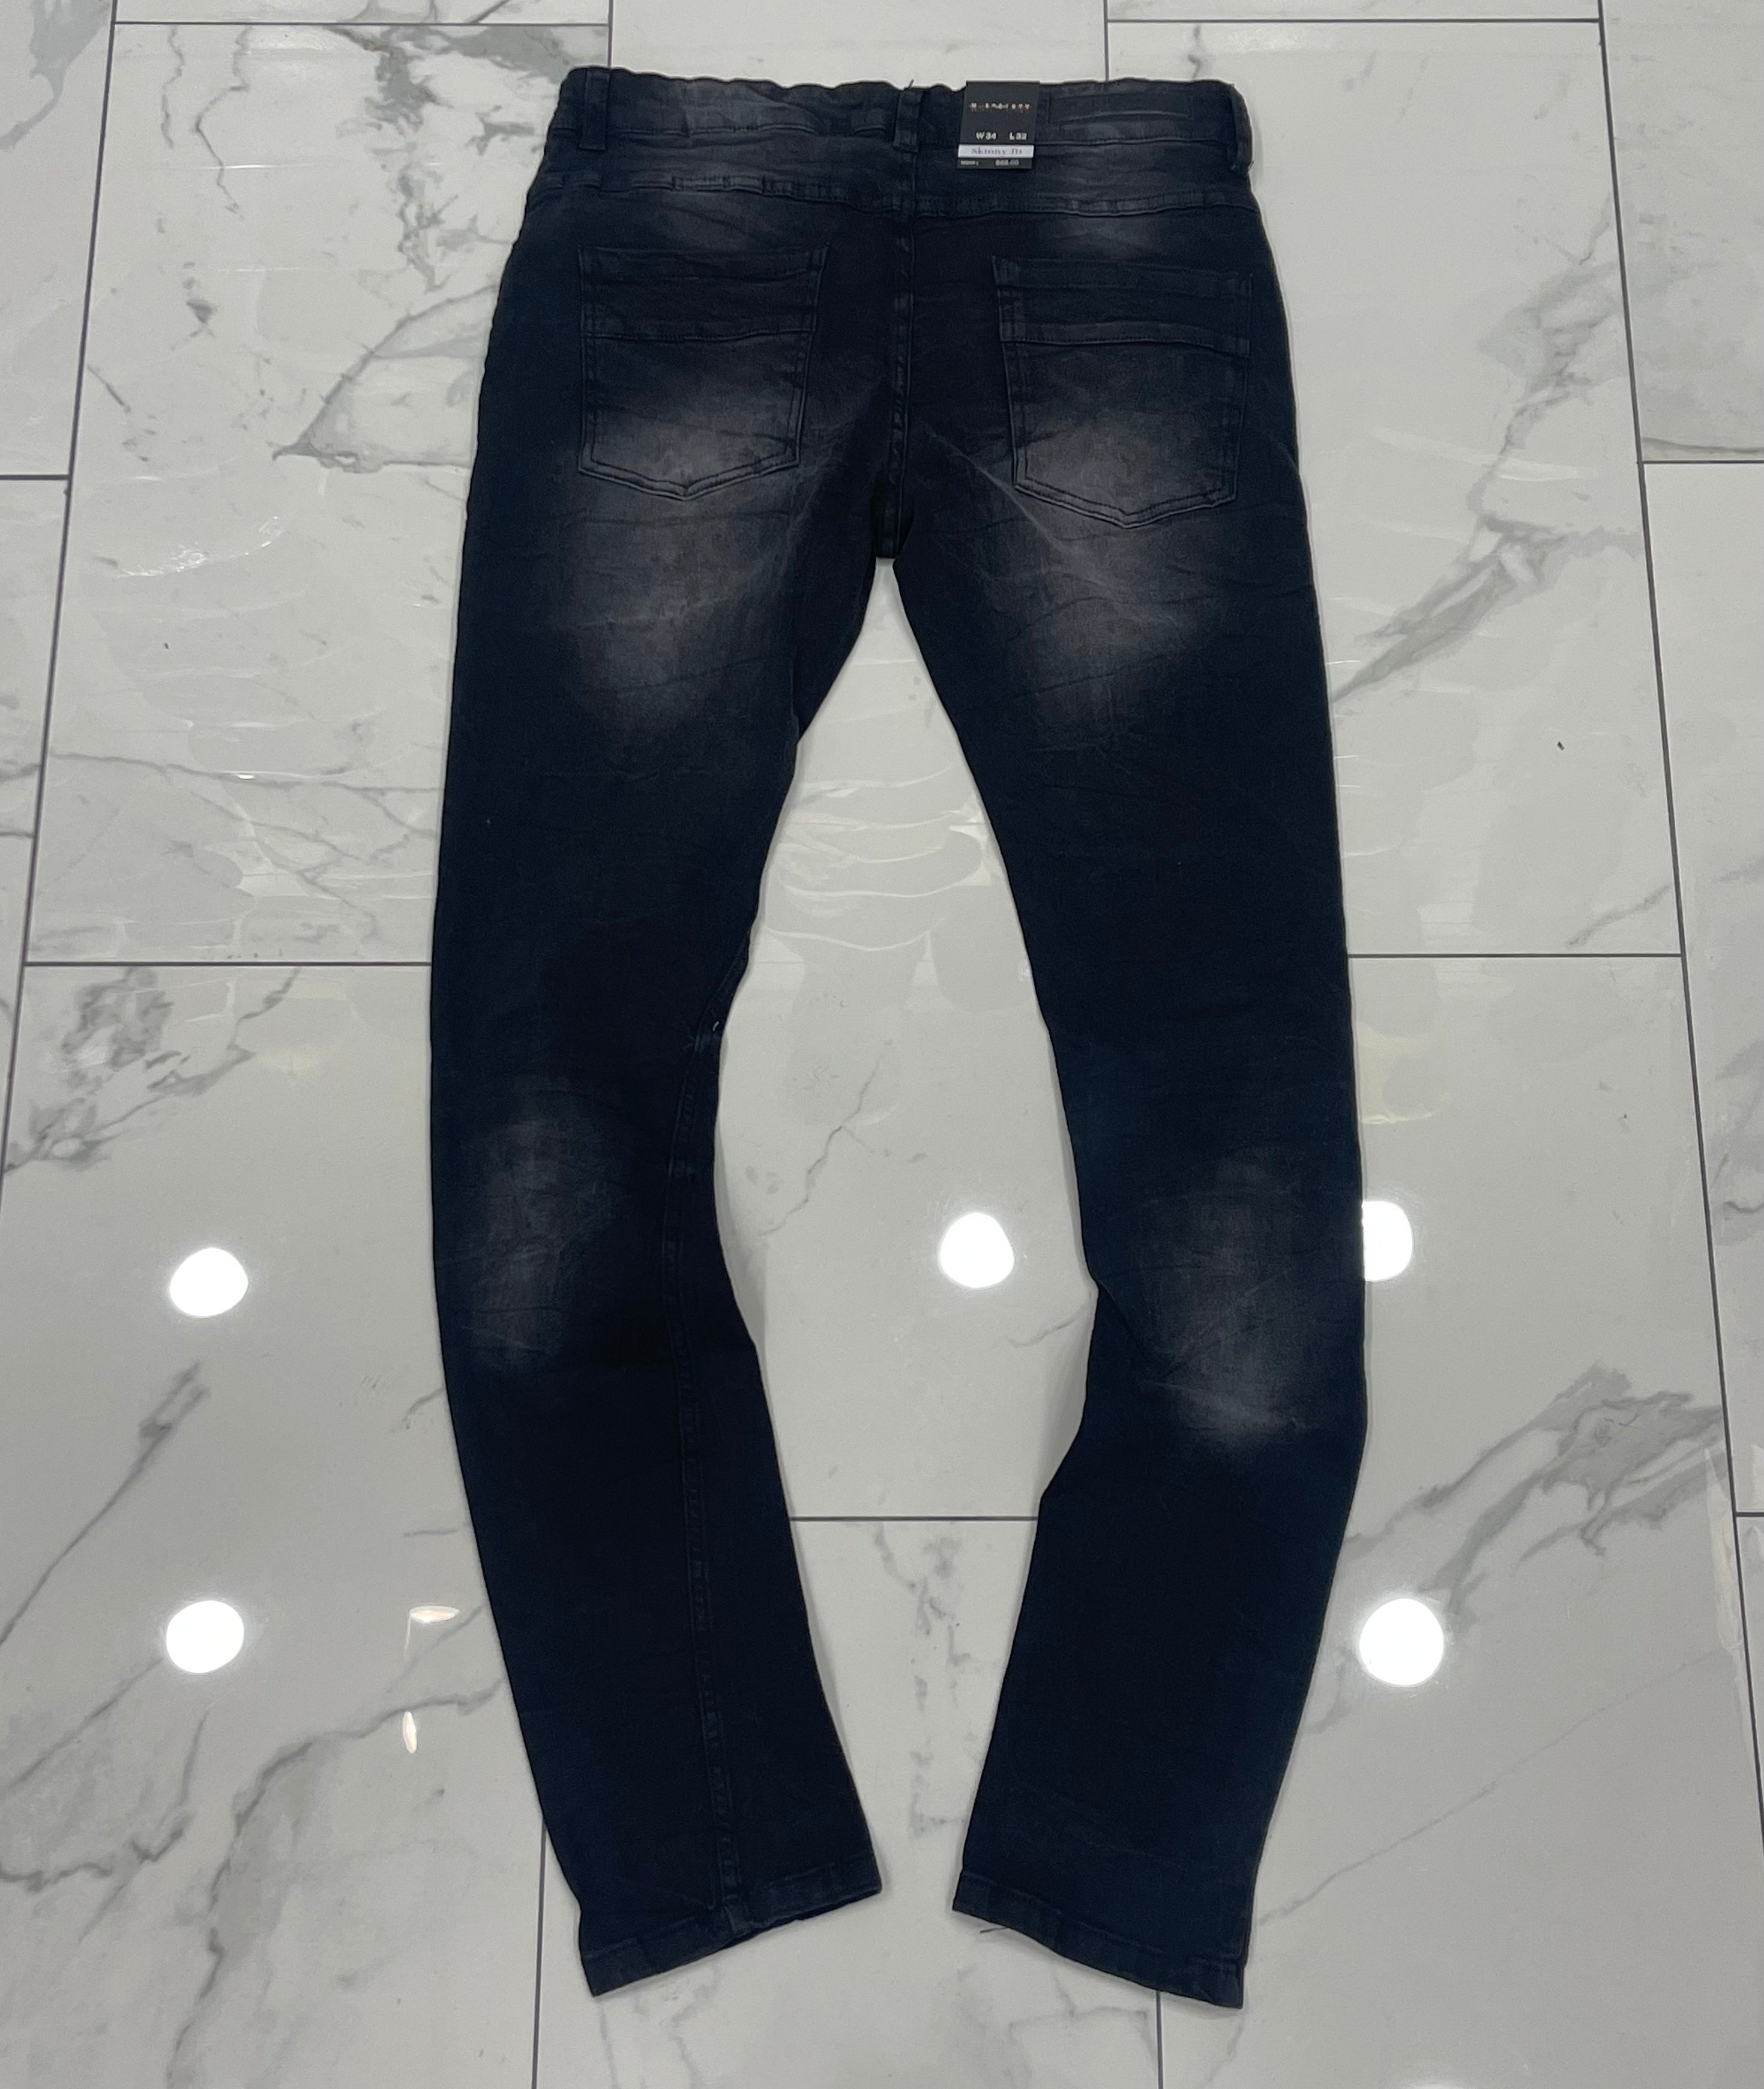 M. Society Black Wash Ripped Skinny Fit Jeans